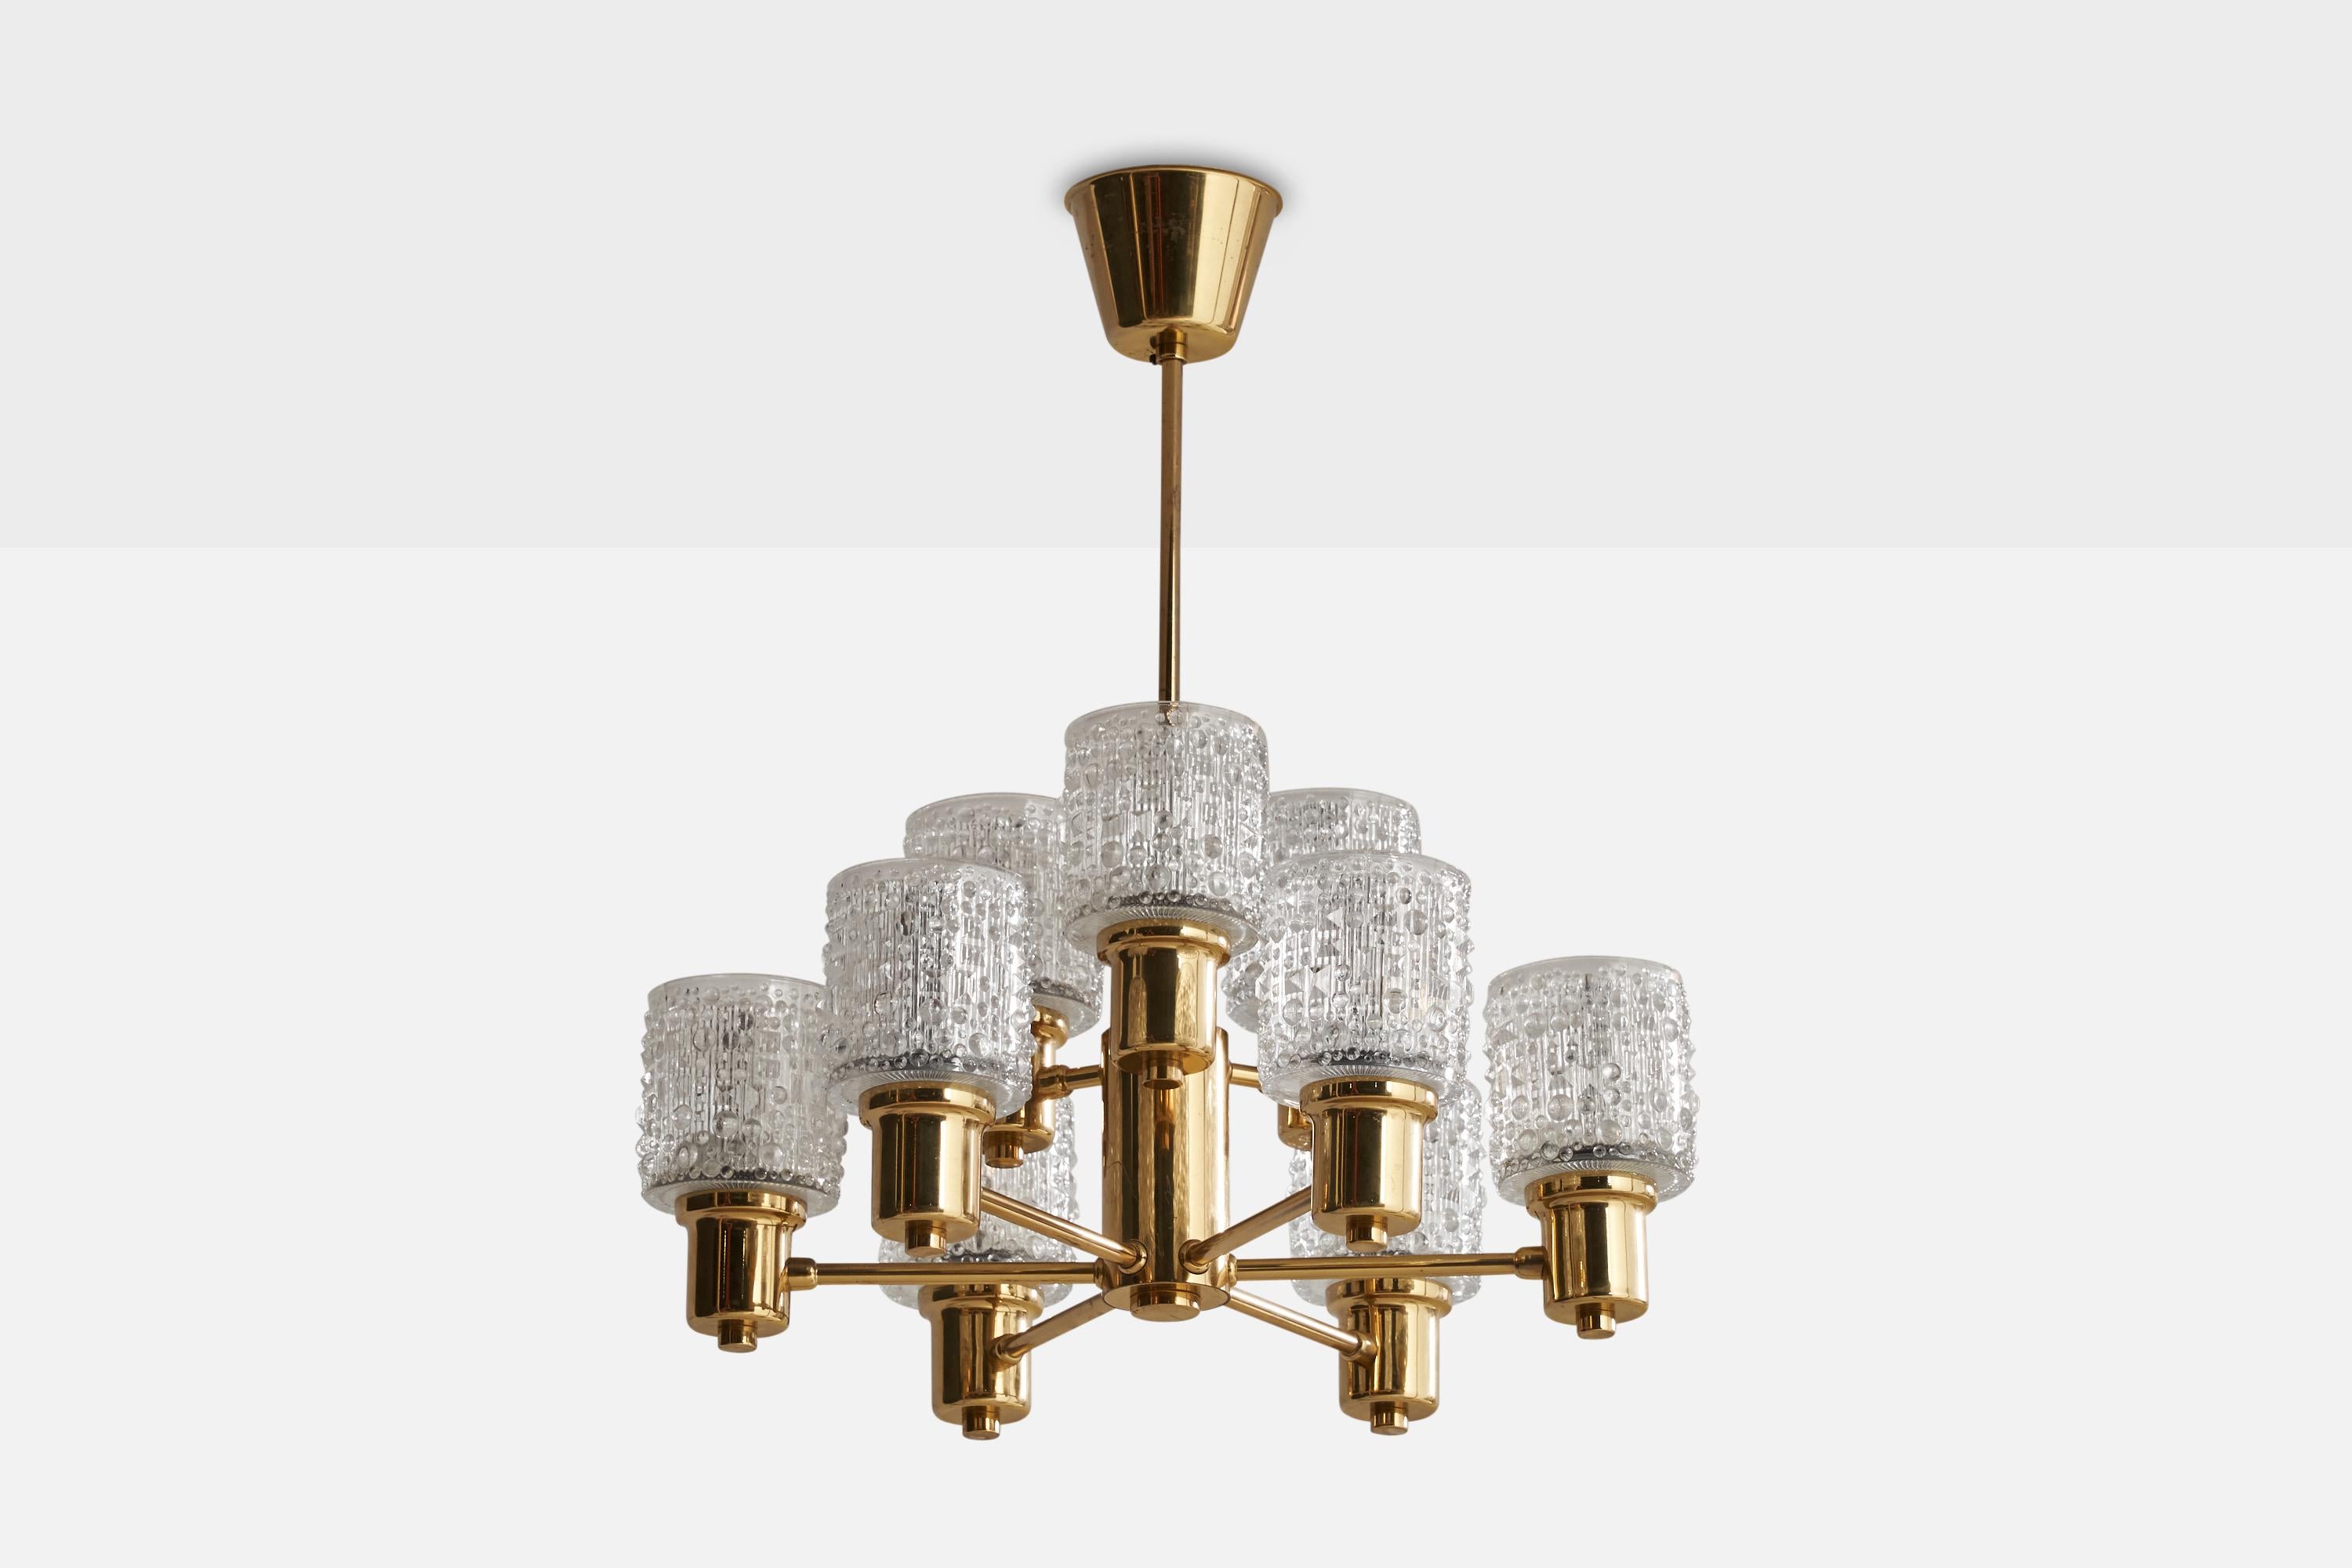 A brass and glass chandelier designed and produced in Sweden, c. 1960s.

Dimensions of canopy (inches): 2.5” H x 3.9” Diameter
Socket takes standard E-14 bulbs. 9 sockets.There is no maximum wattage stated on the fixture. All lighting will be